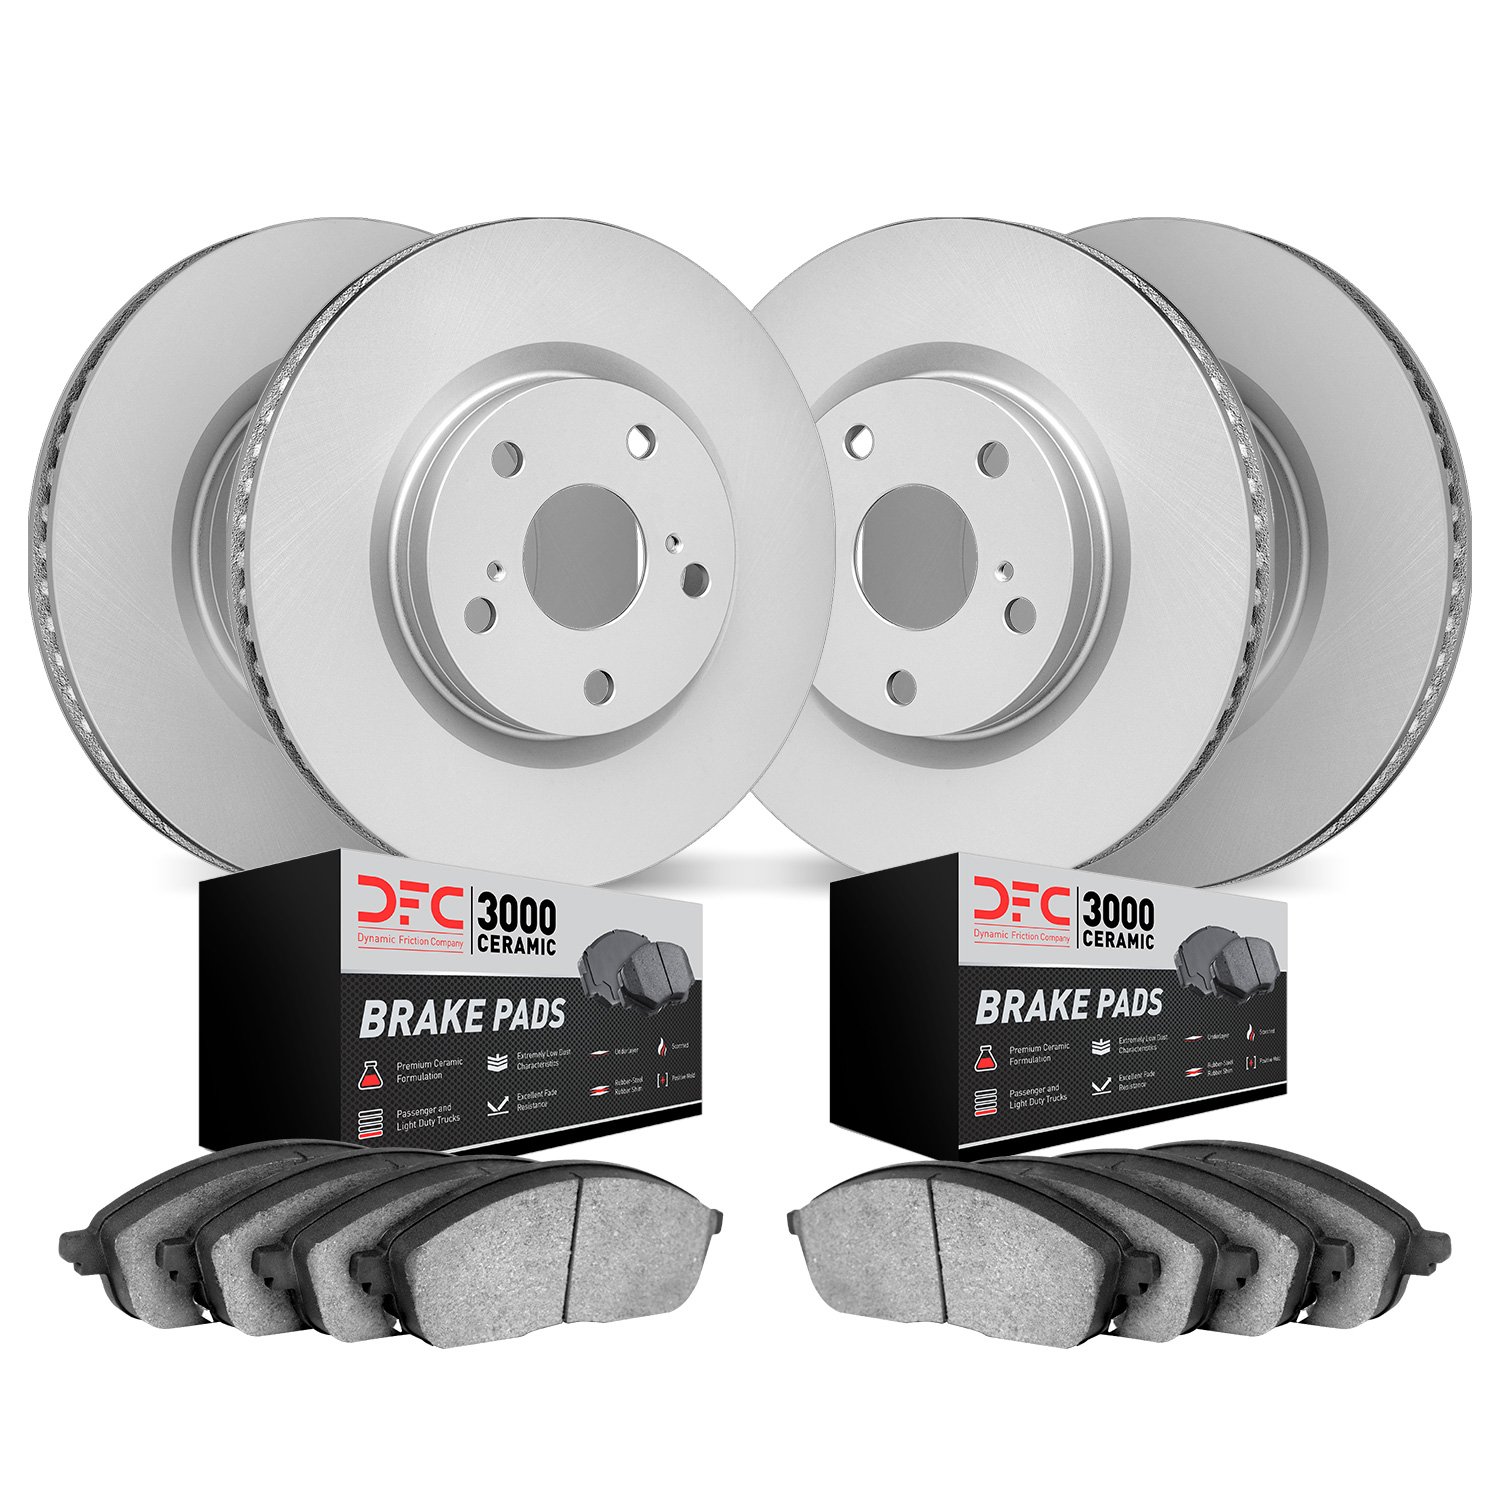 4304-31017 Geospec Brake Rotors with 3000-Series Ceramic Brake Pads Kit, 2003-2008 BMW, Position: Front and Rear